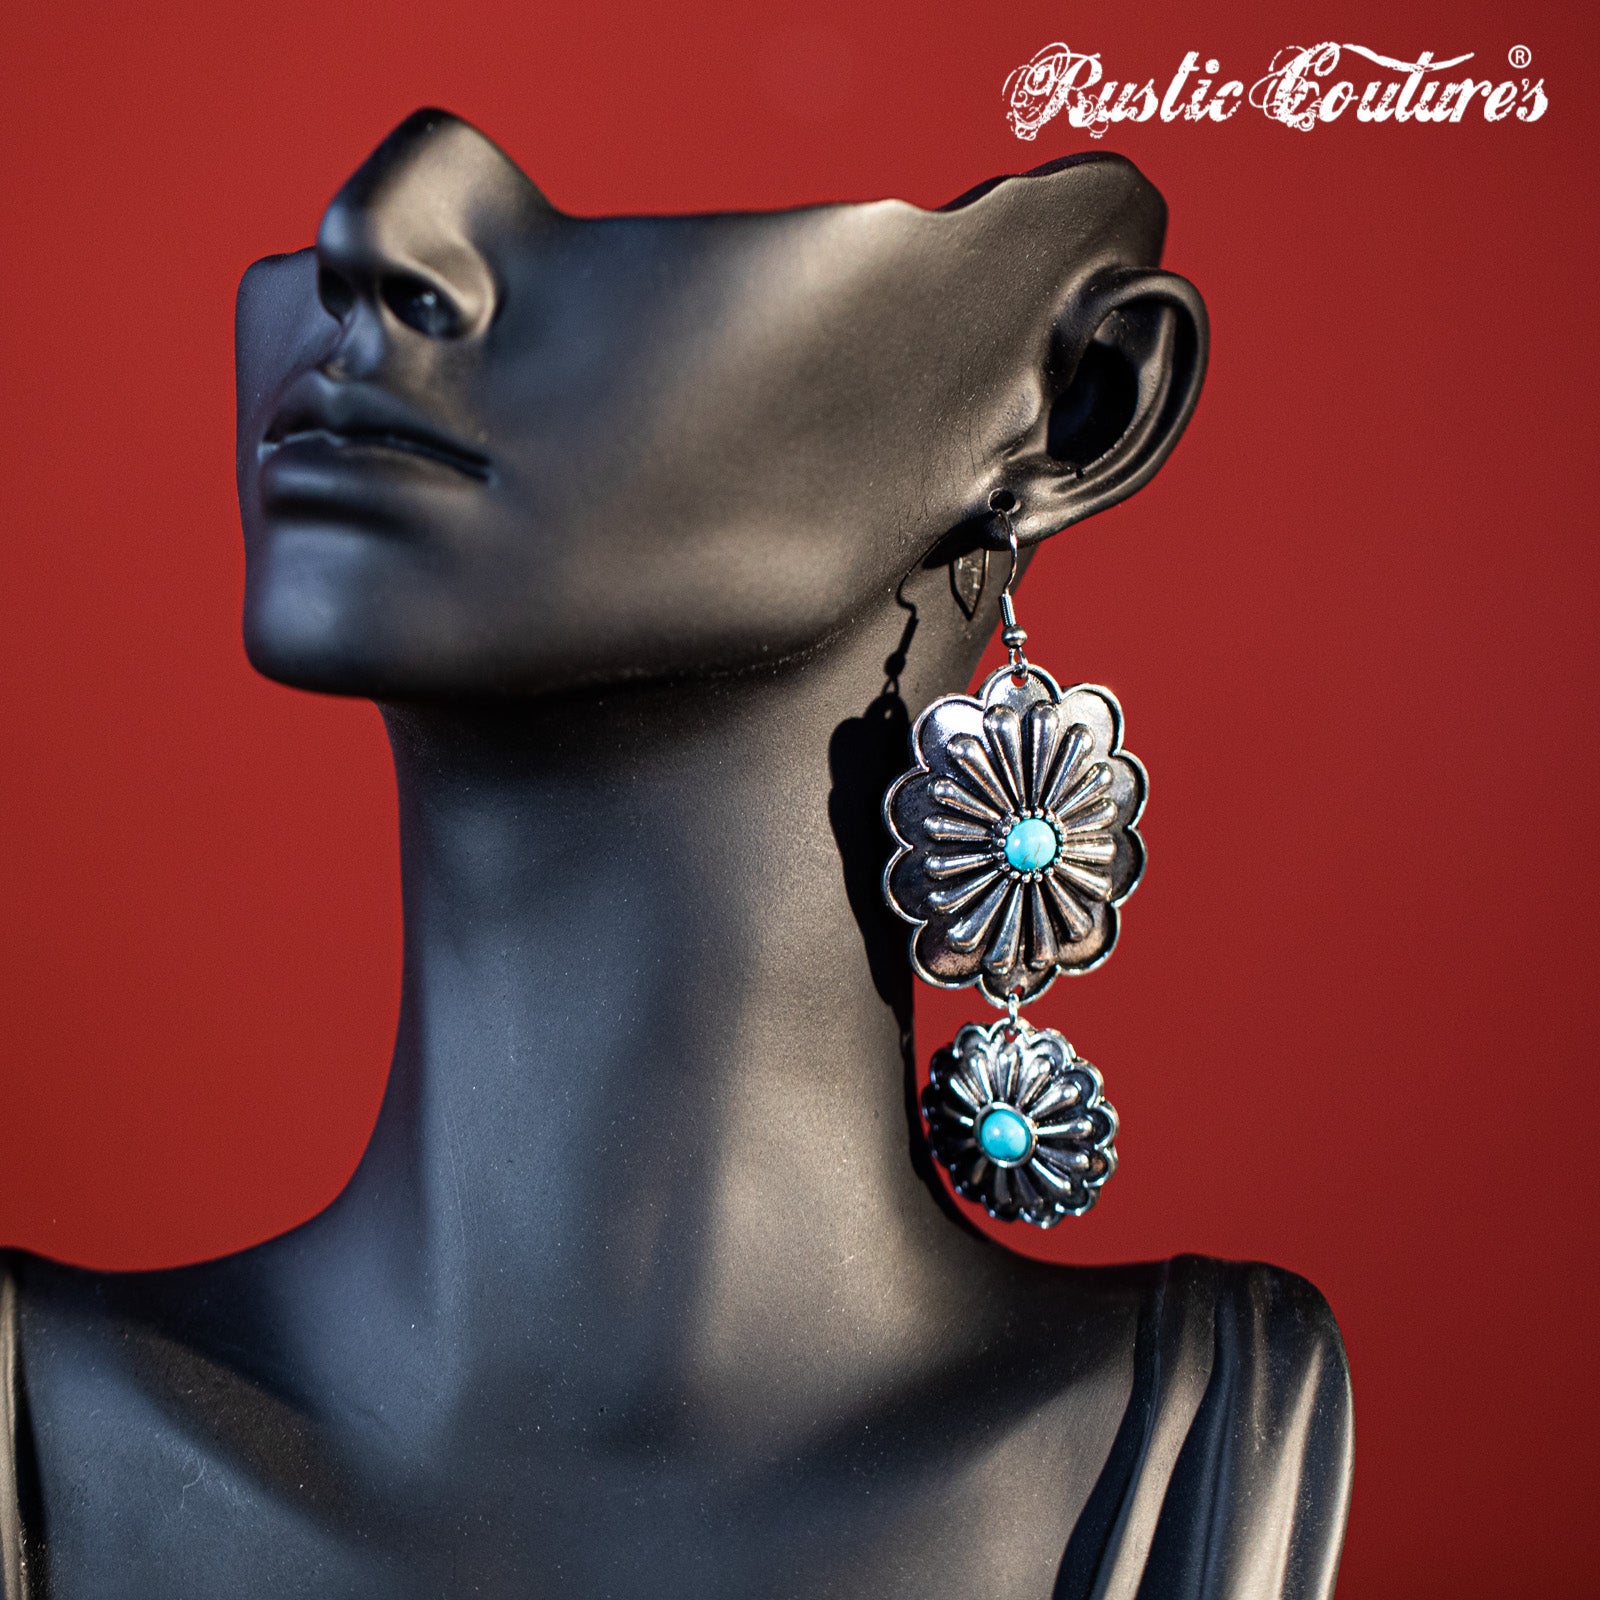 Rustic Couture's Silver Concho with Natural Stone Dangling Earring - Cowgirl Wear